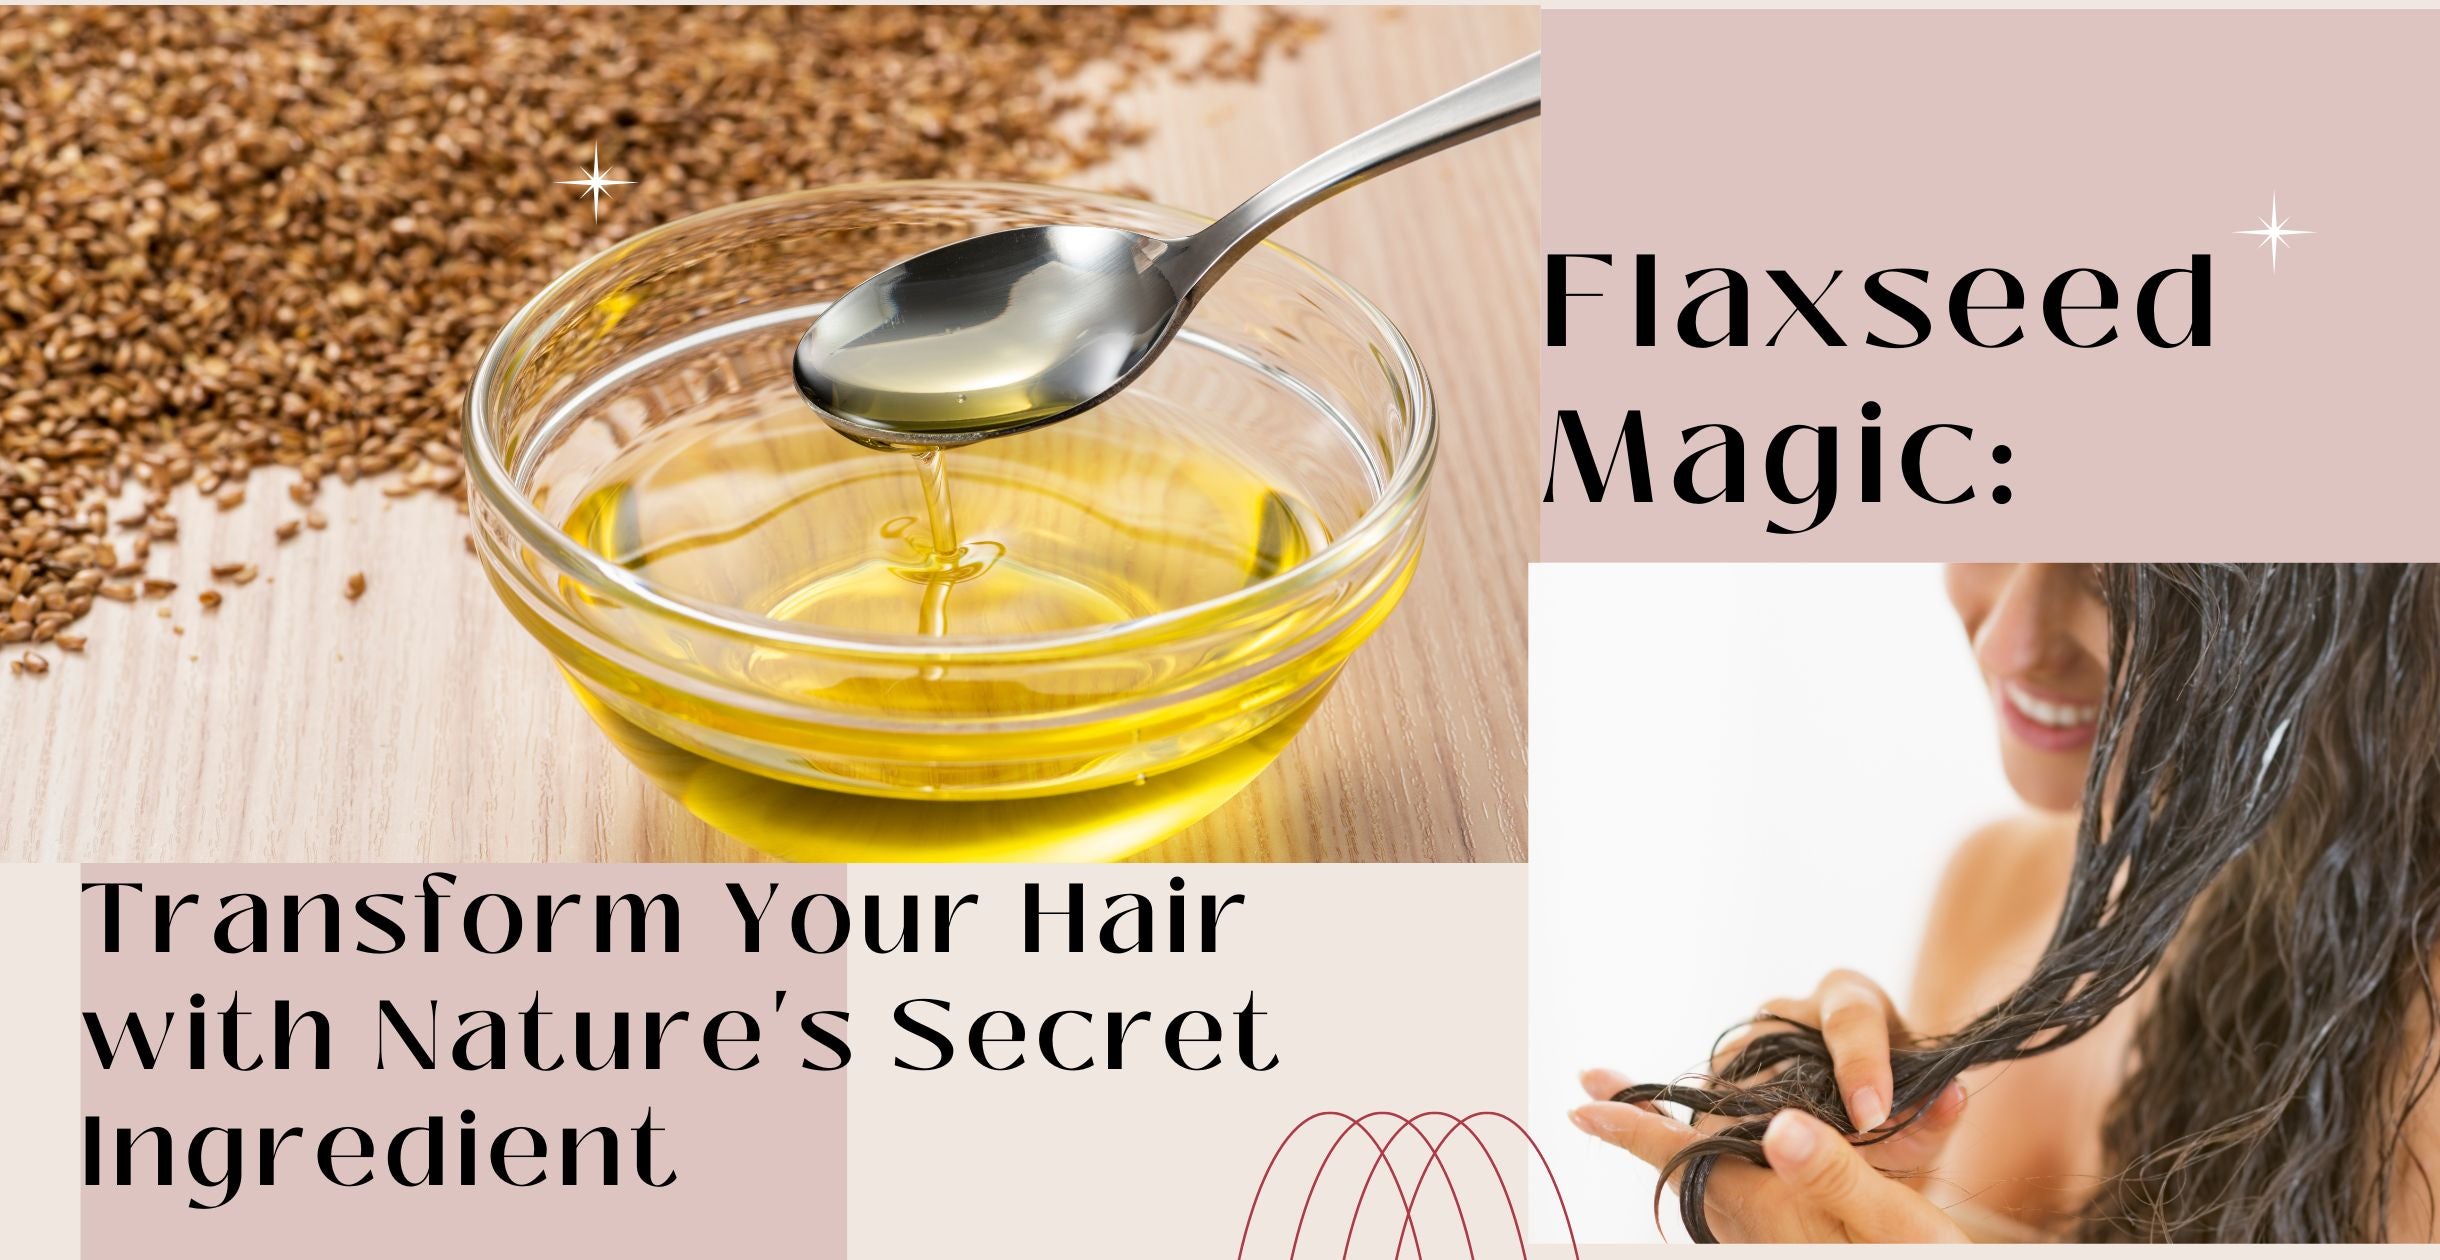 Flaxseed Magic: Transform Your Hair with Nature's Secret Ingredient